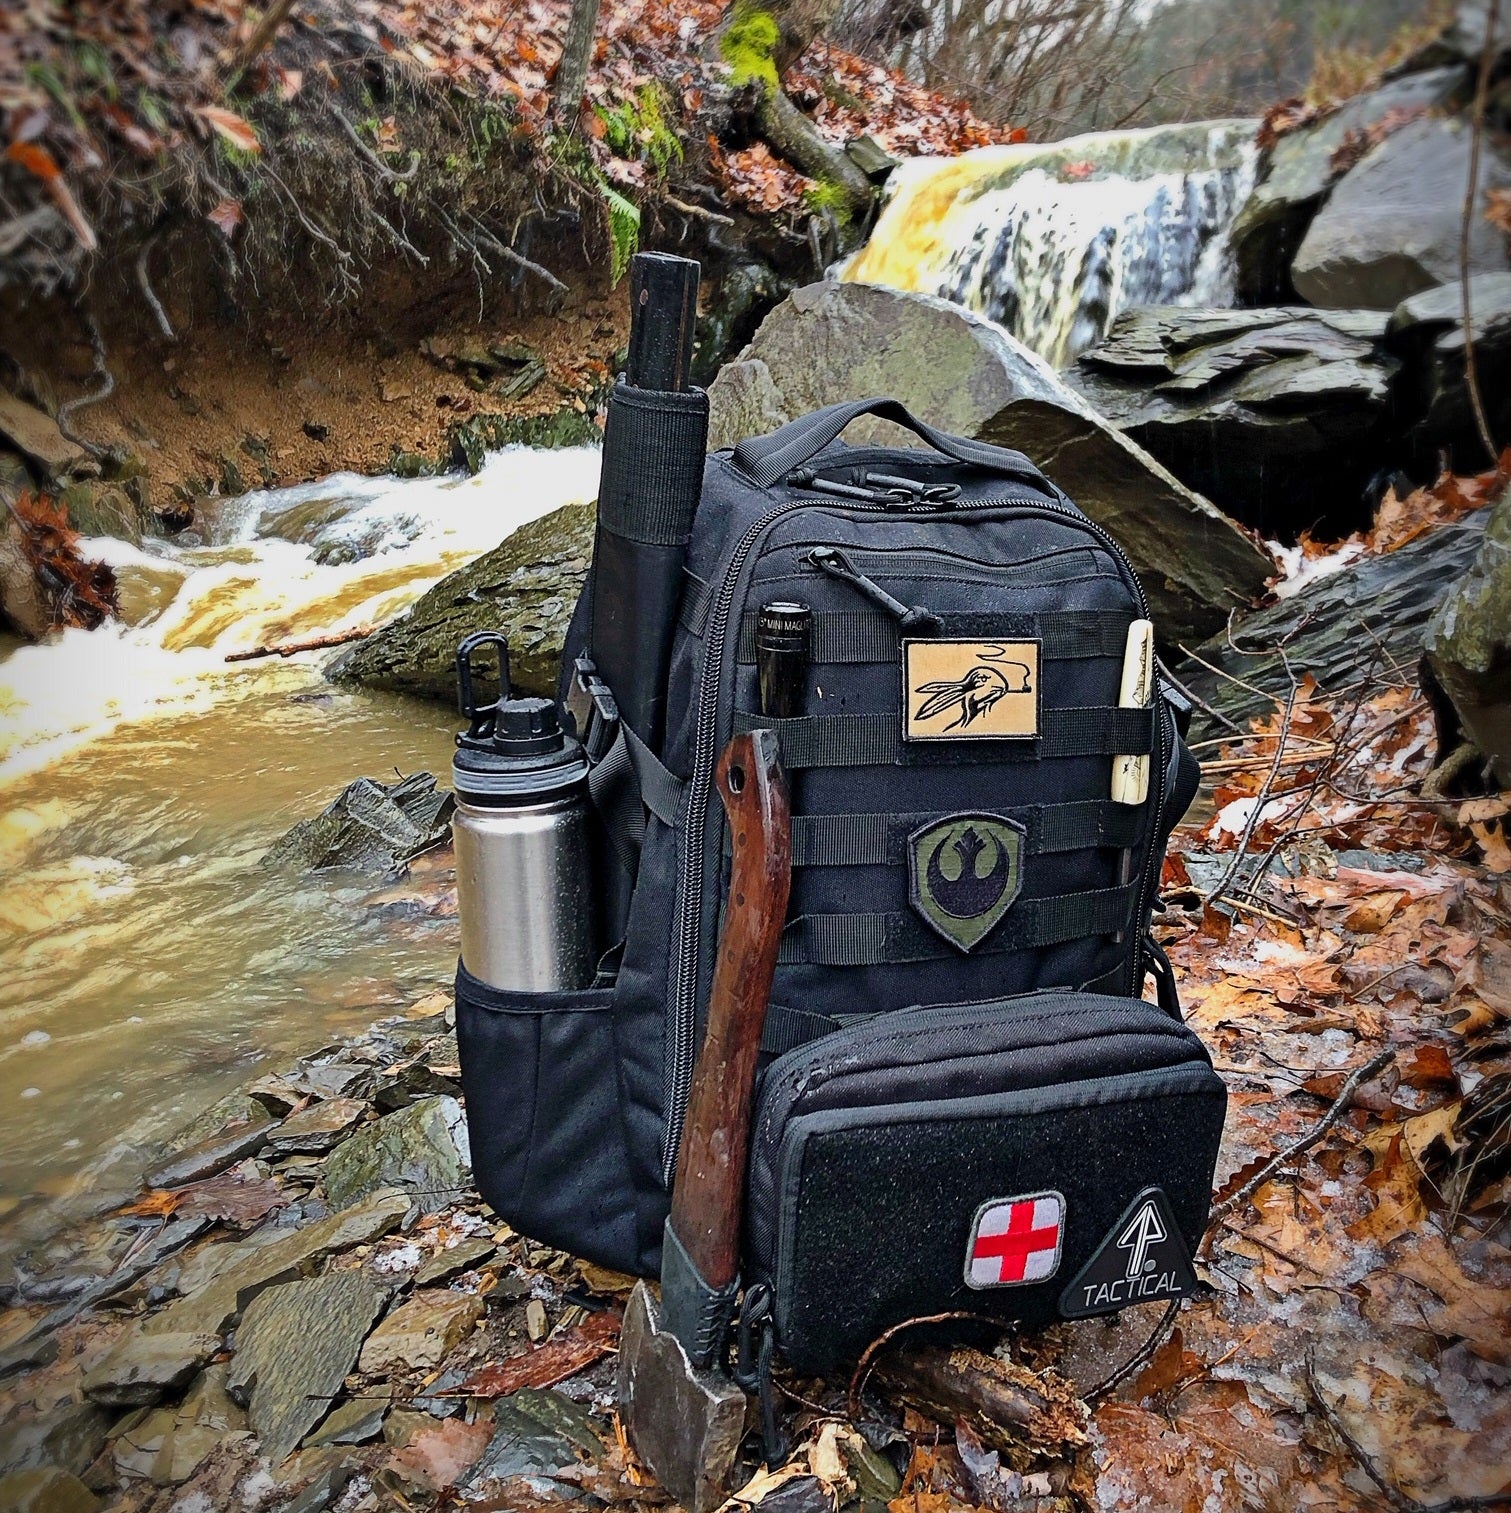 14er Tactical Backpack with molle accessories in the woods